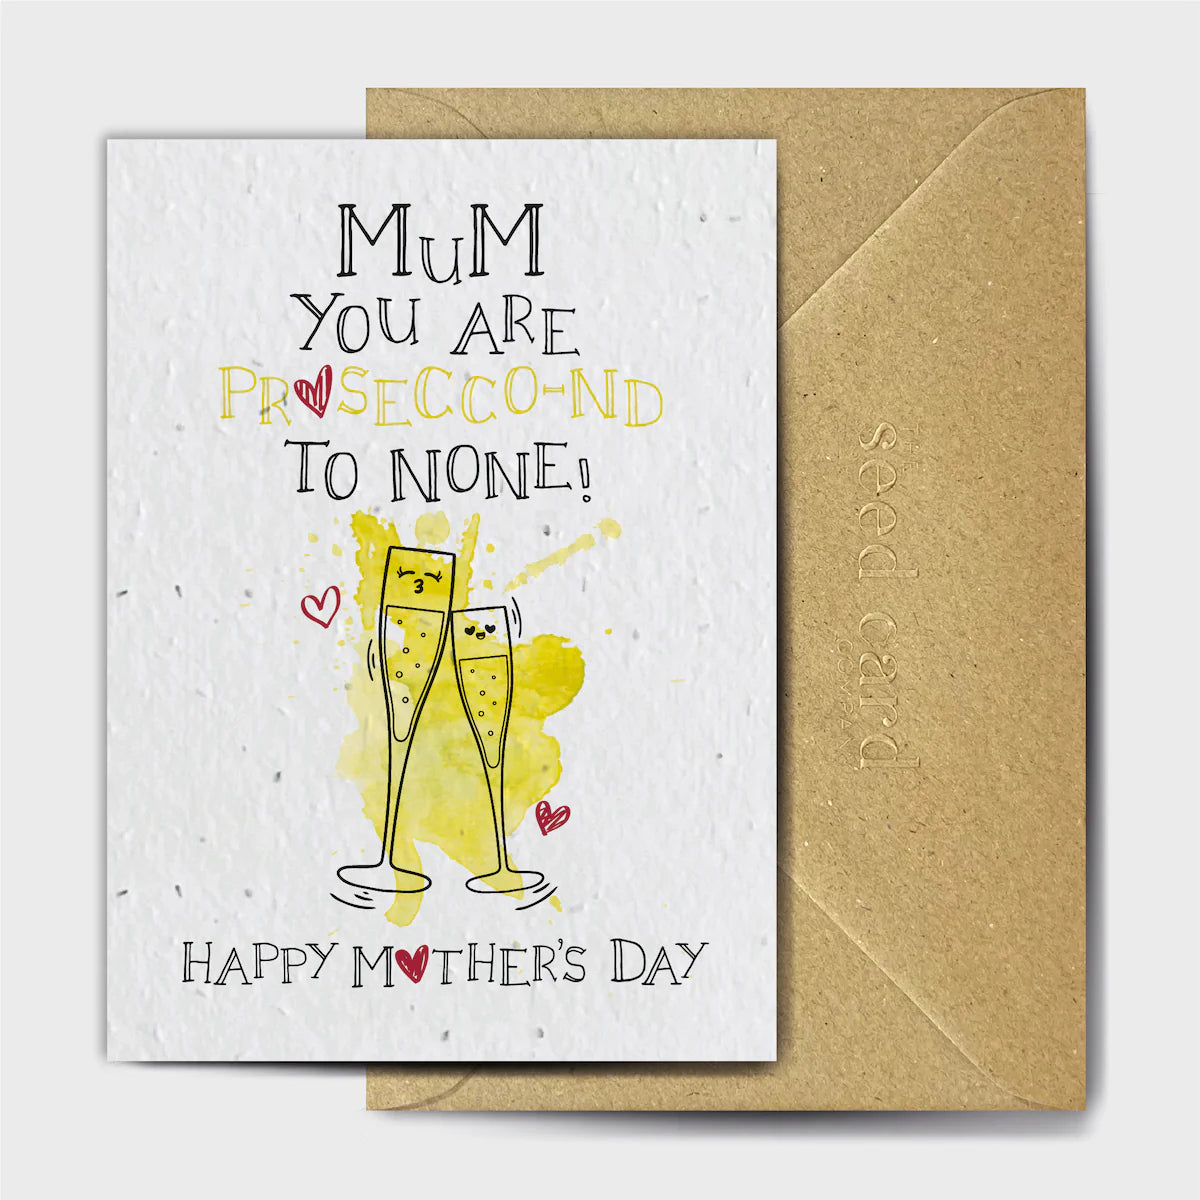 Mum you are Prosecco-nd to none - Plantable Seed Card